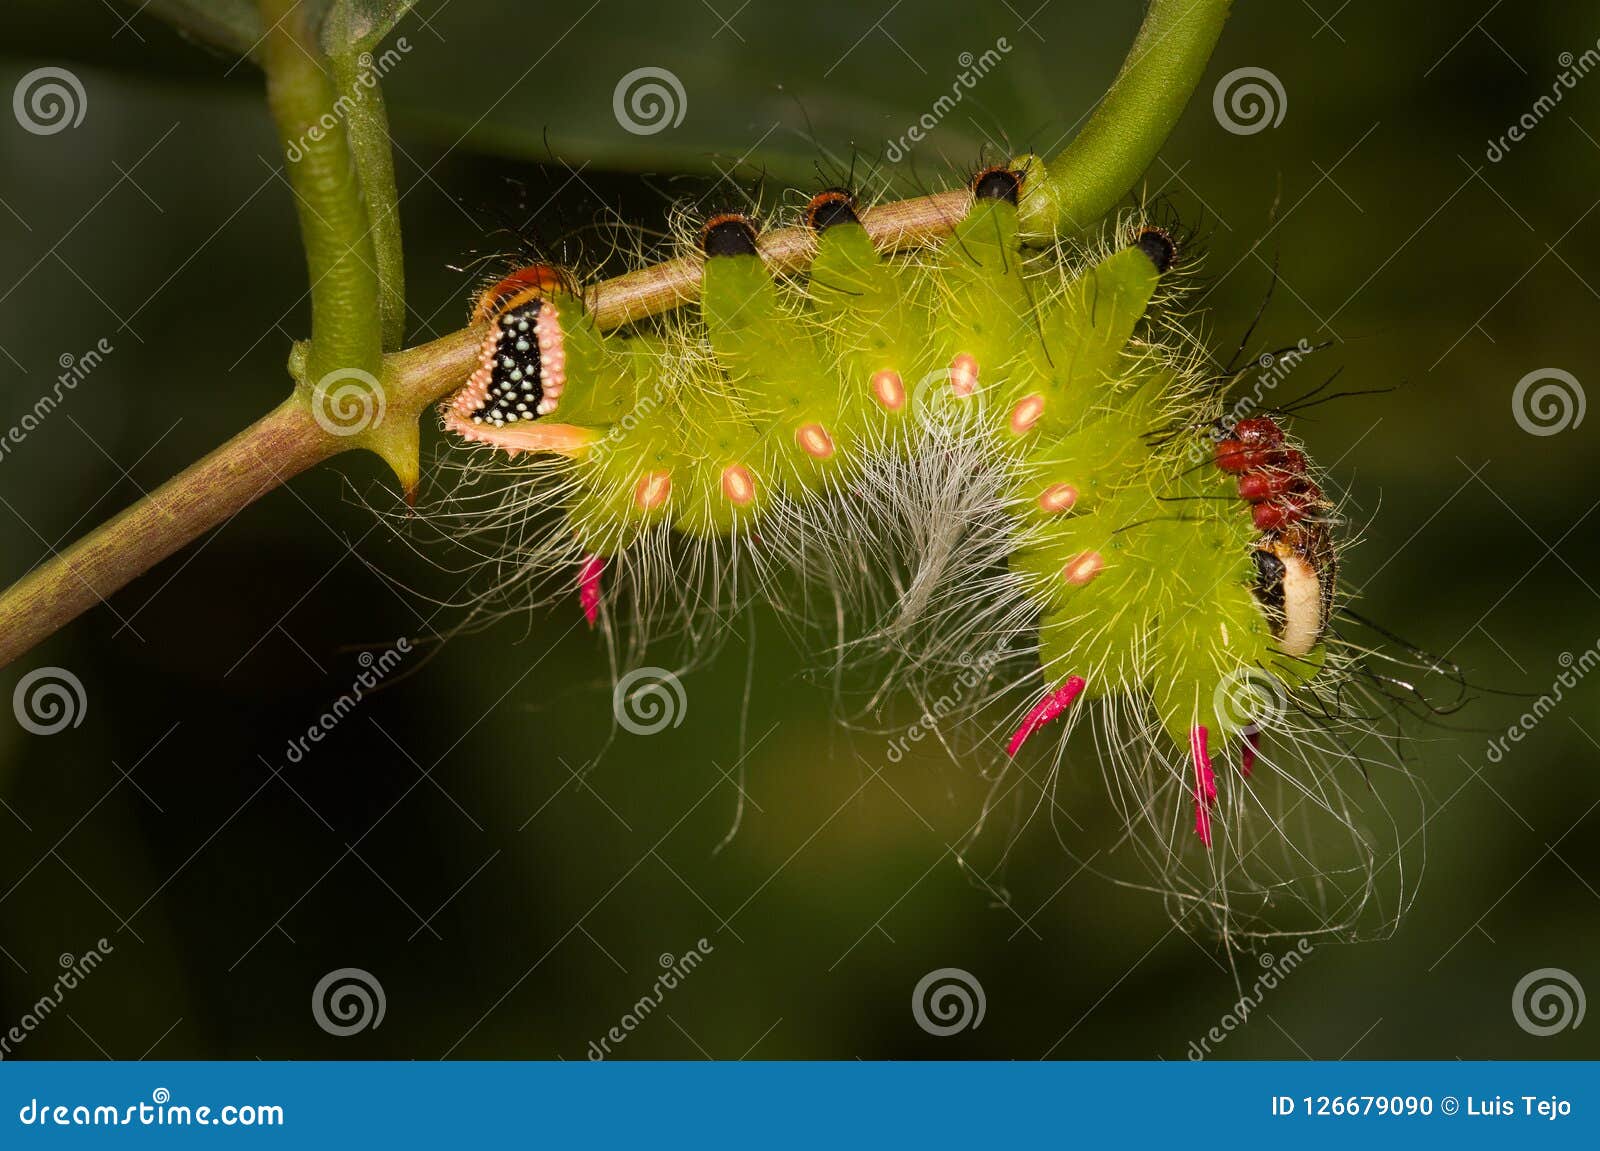 a colorful caterpillar of a moth